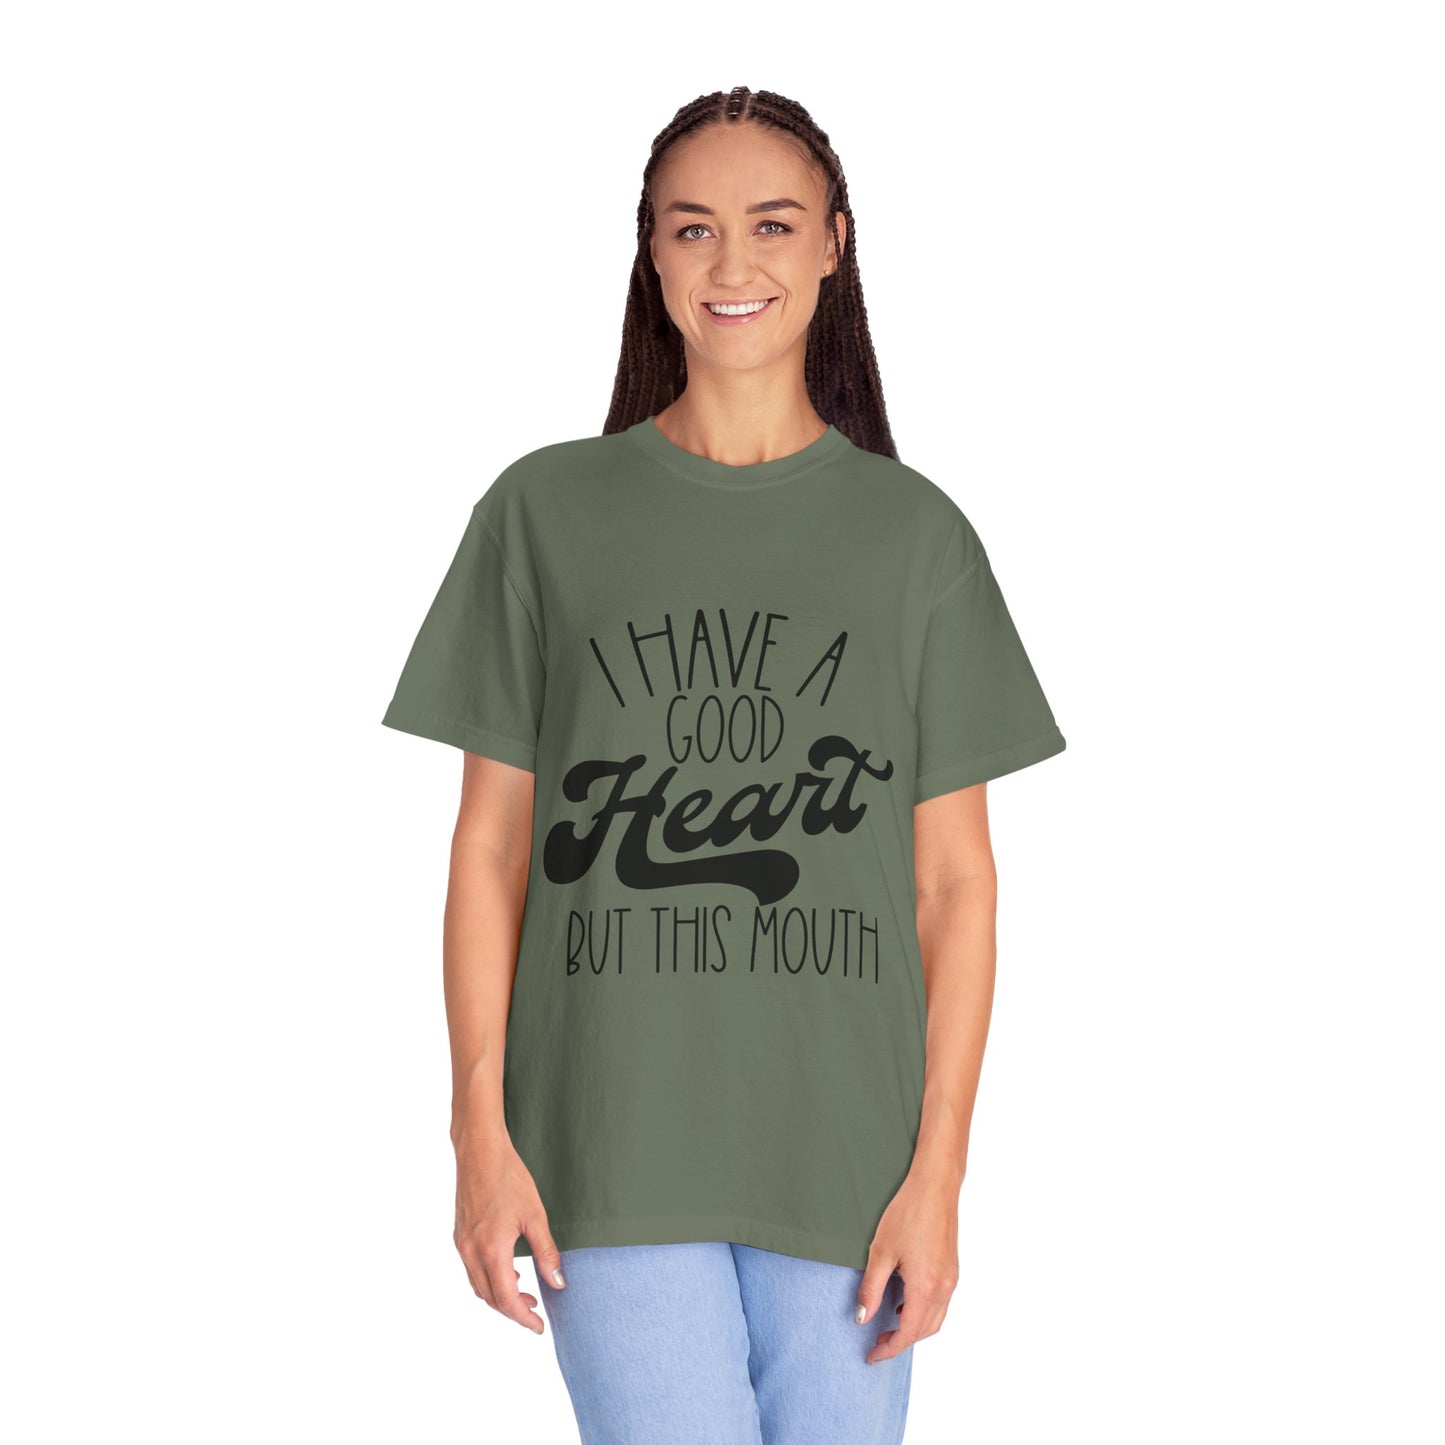 I have a good heart - Unisex Garment-Dyed T-shirt